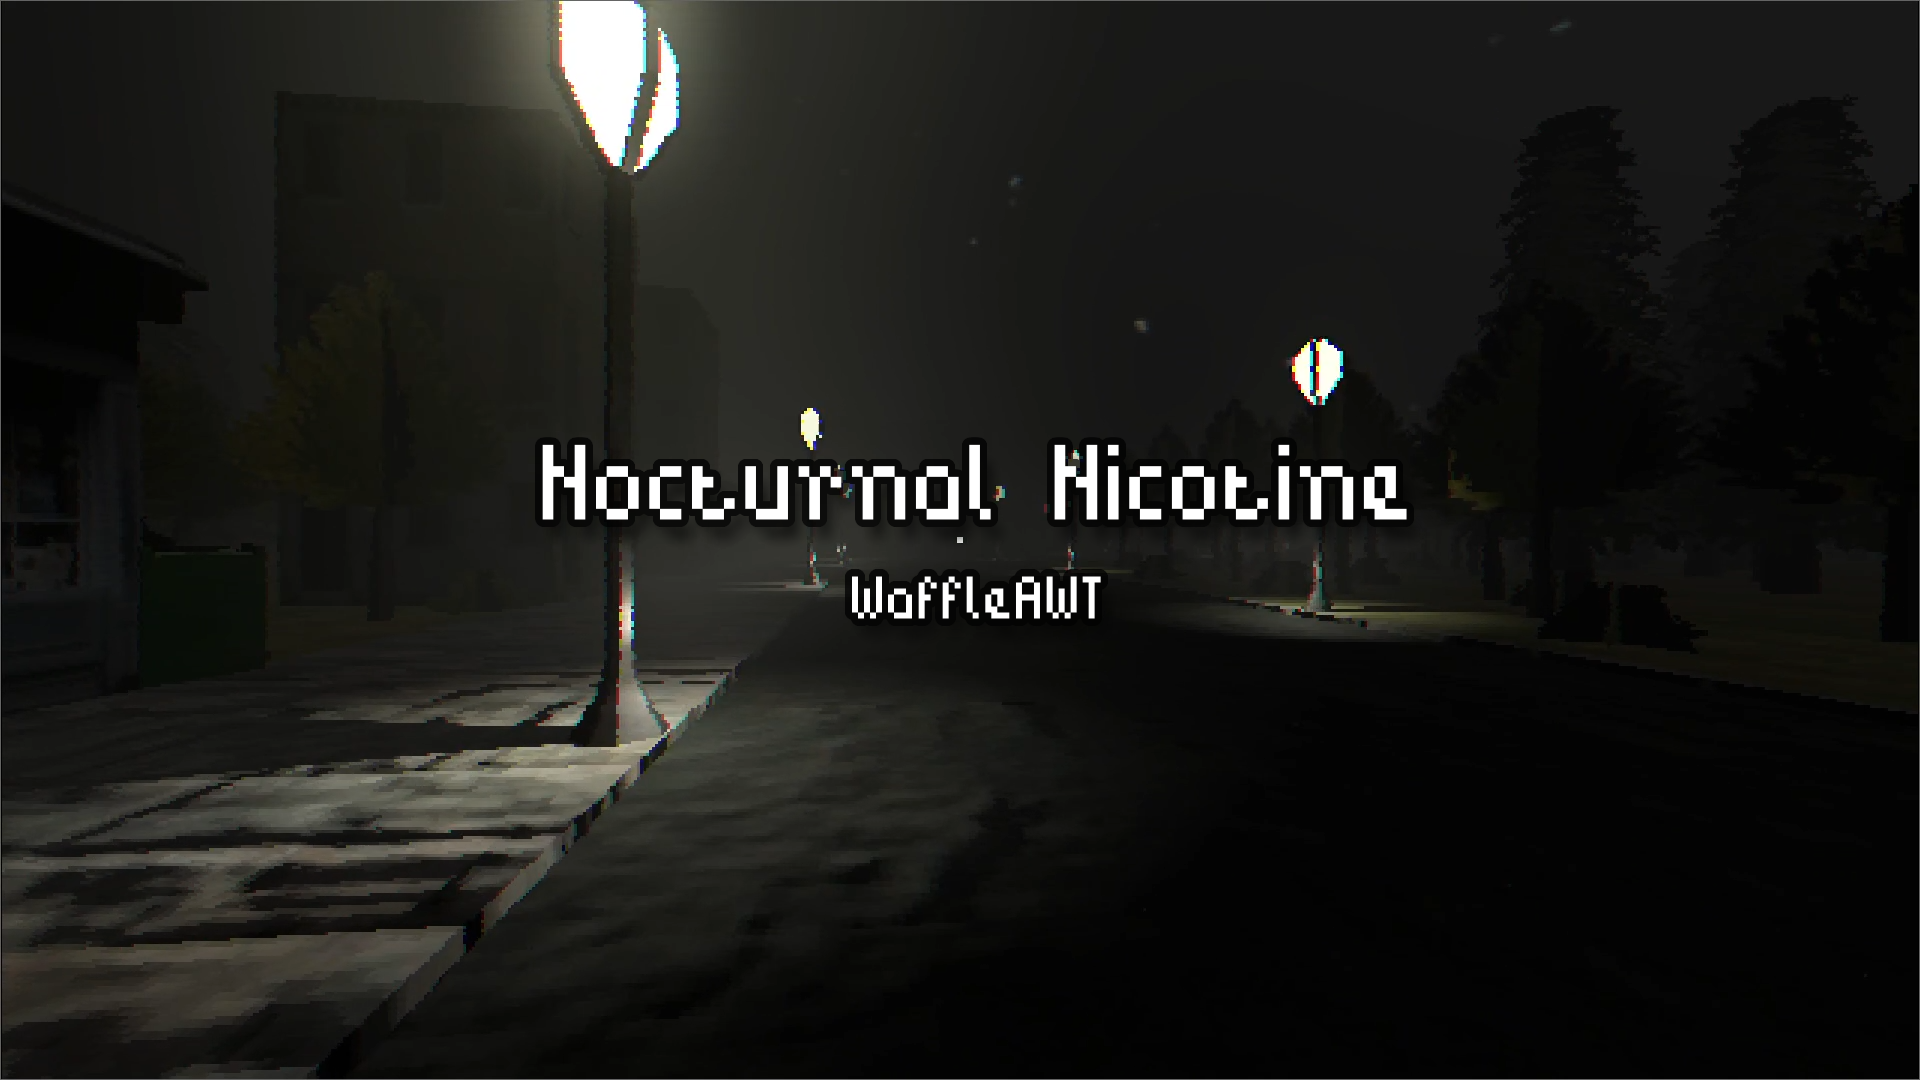 Nocturnal Nicotine